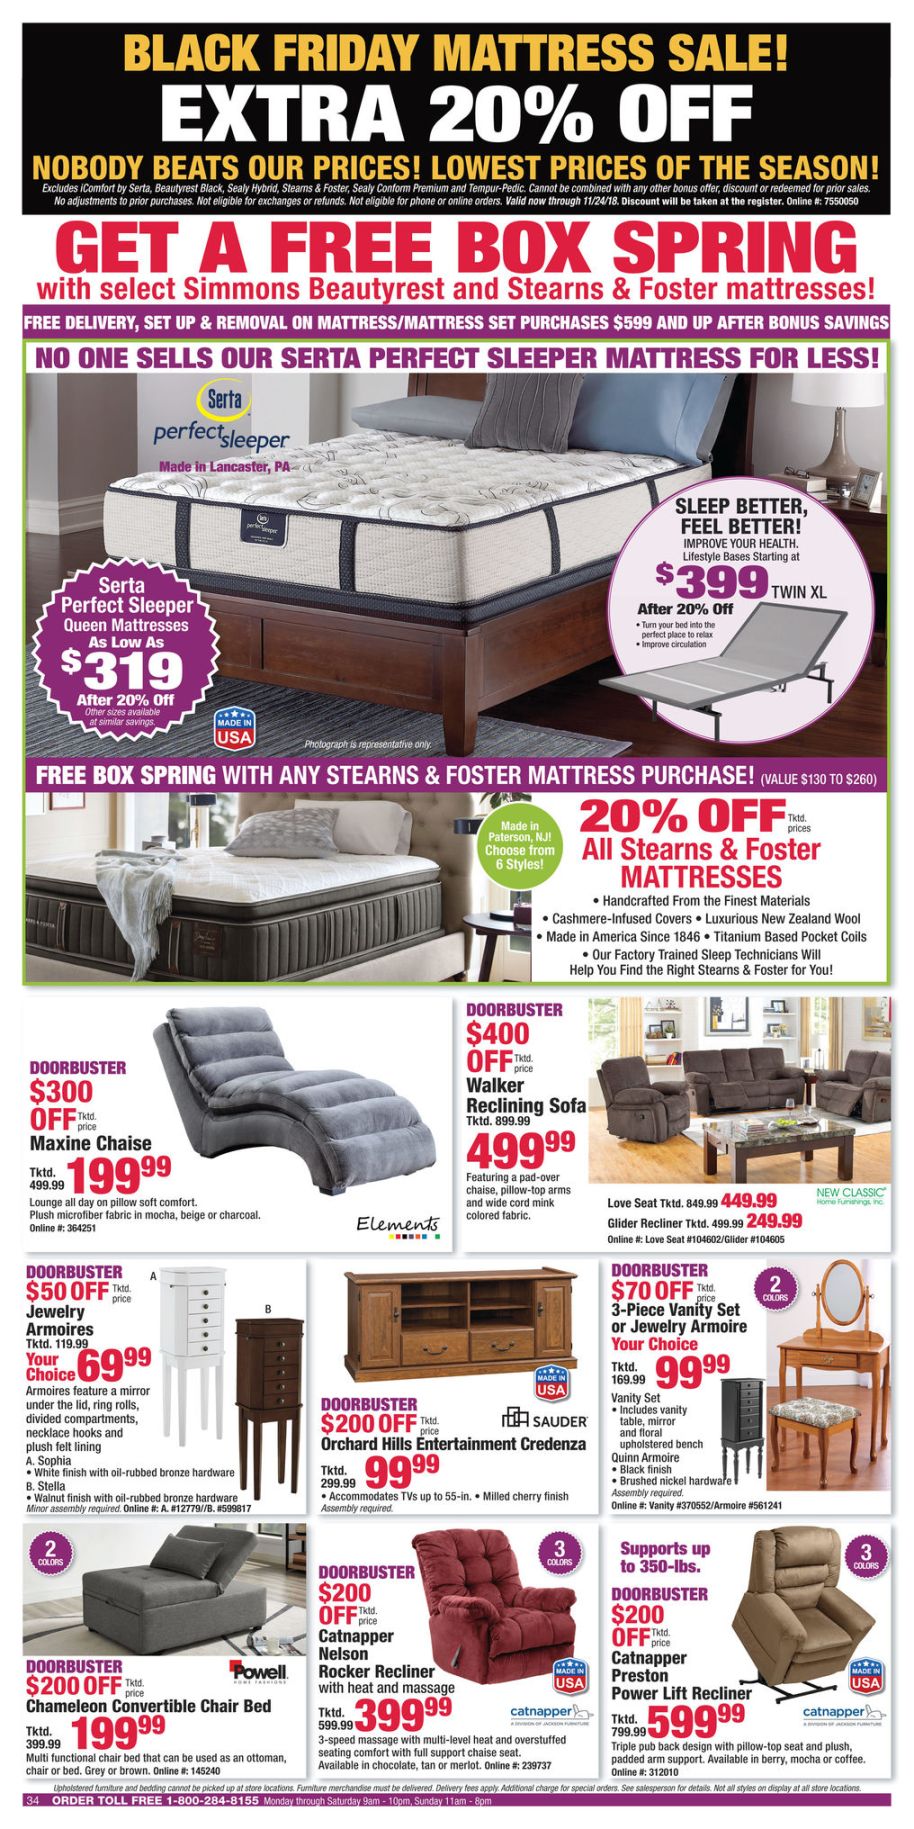 Boscovs Black Friday Ads Sales Deals Doorbusters 2018 – CouponShy